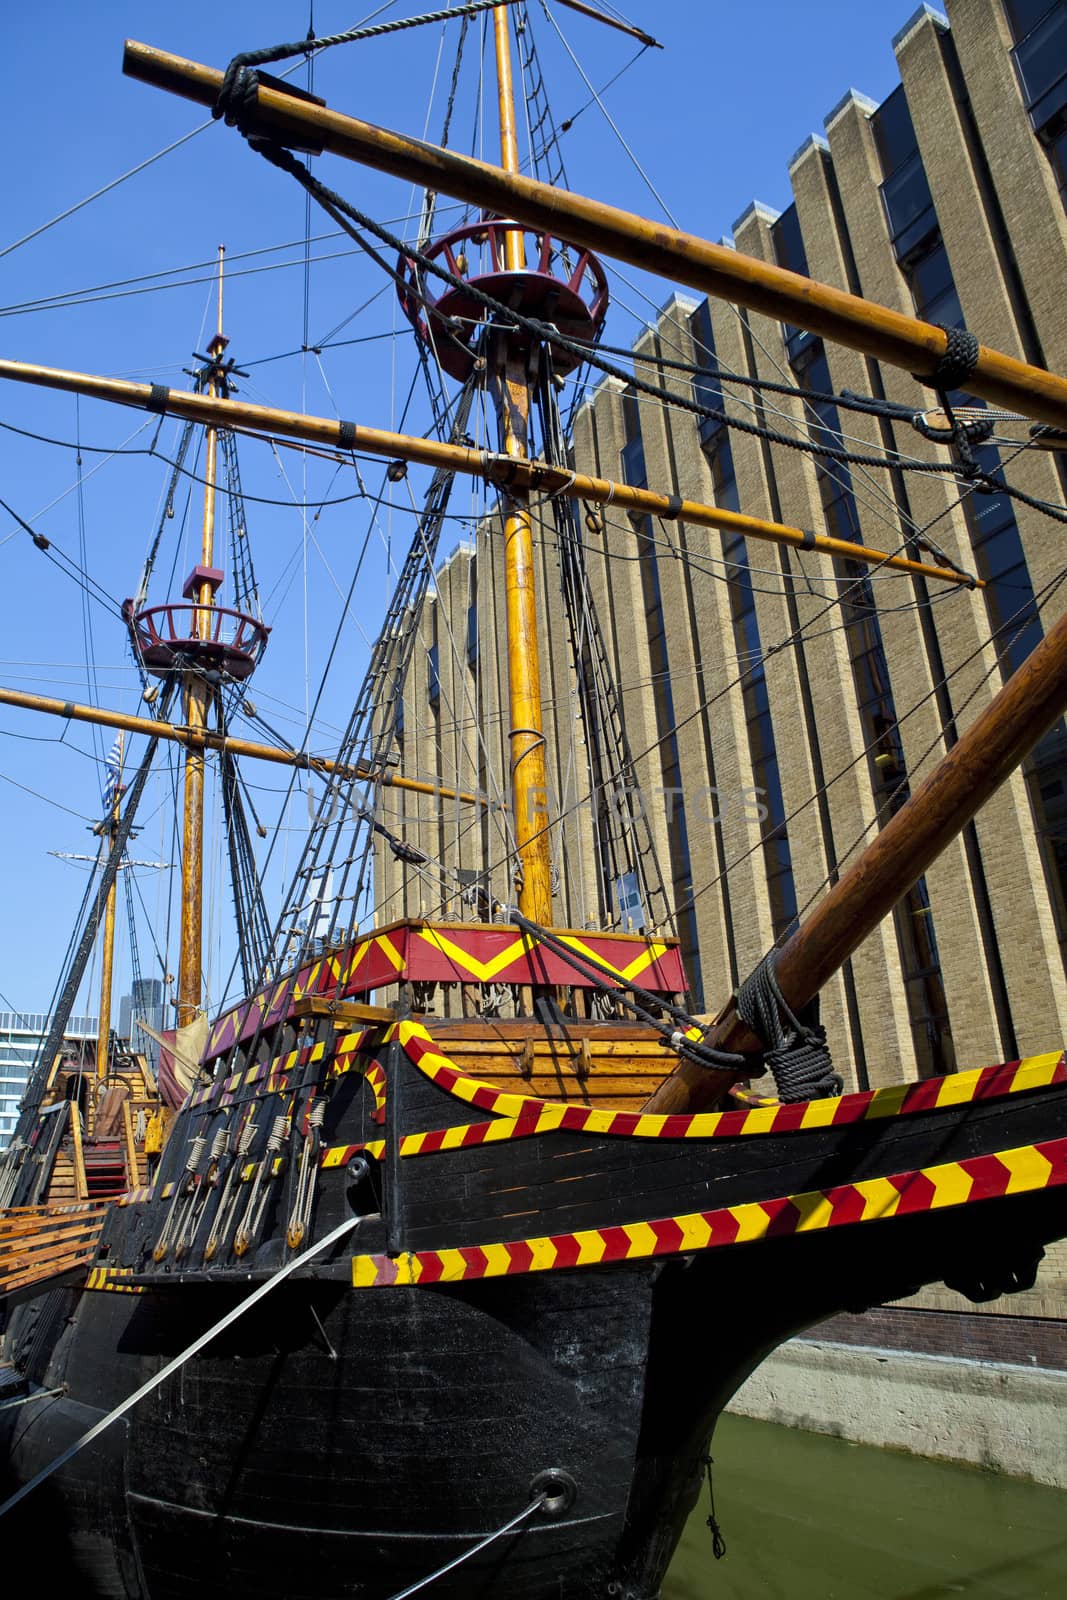 The replica of the famous Golden Hind Galleon Ship which is currently moored in London.